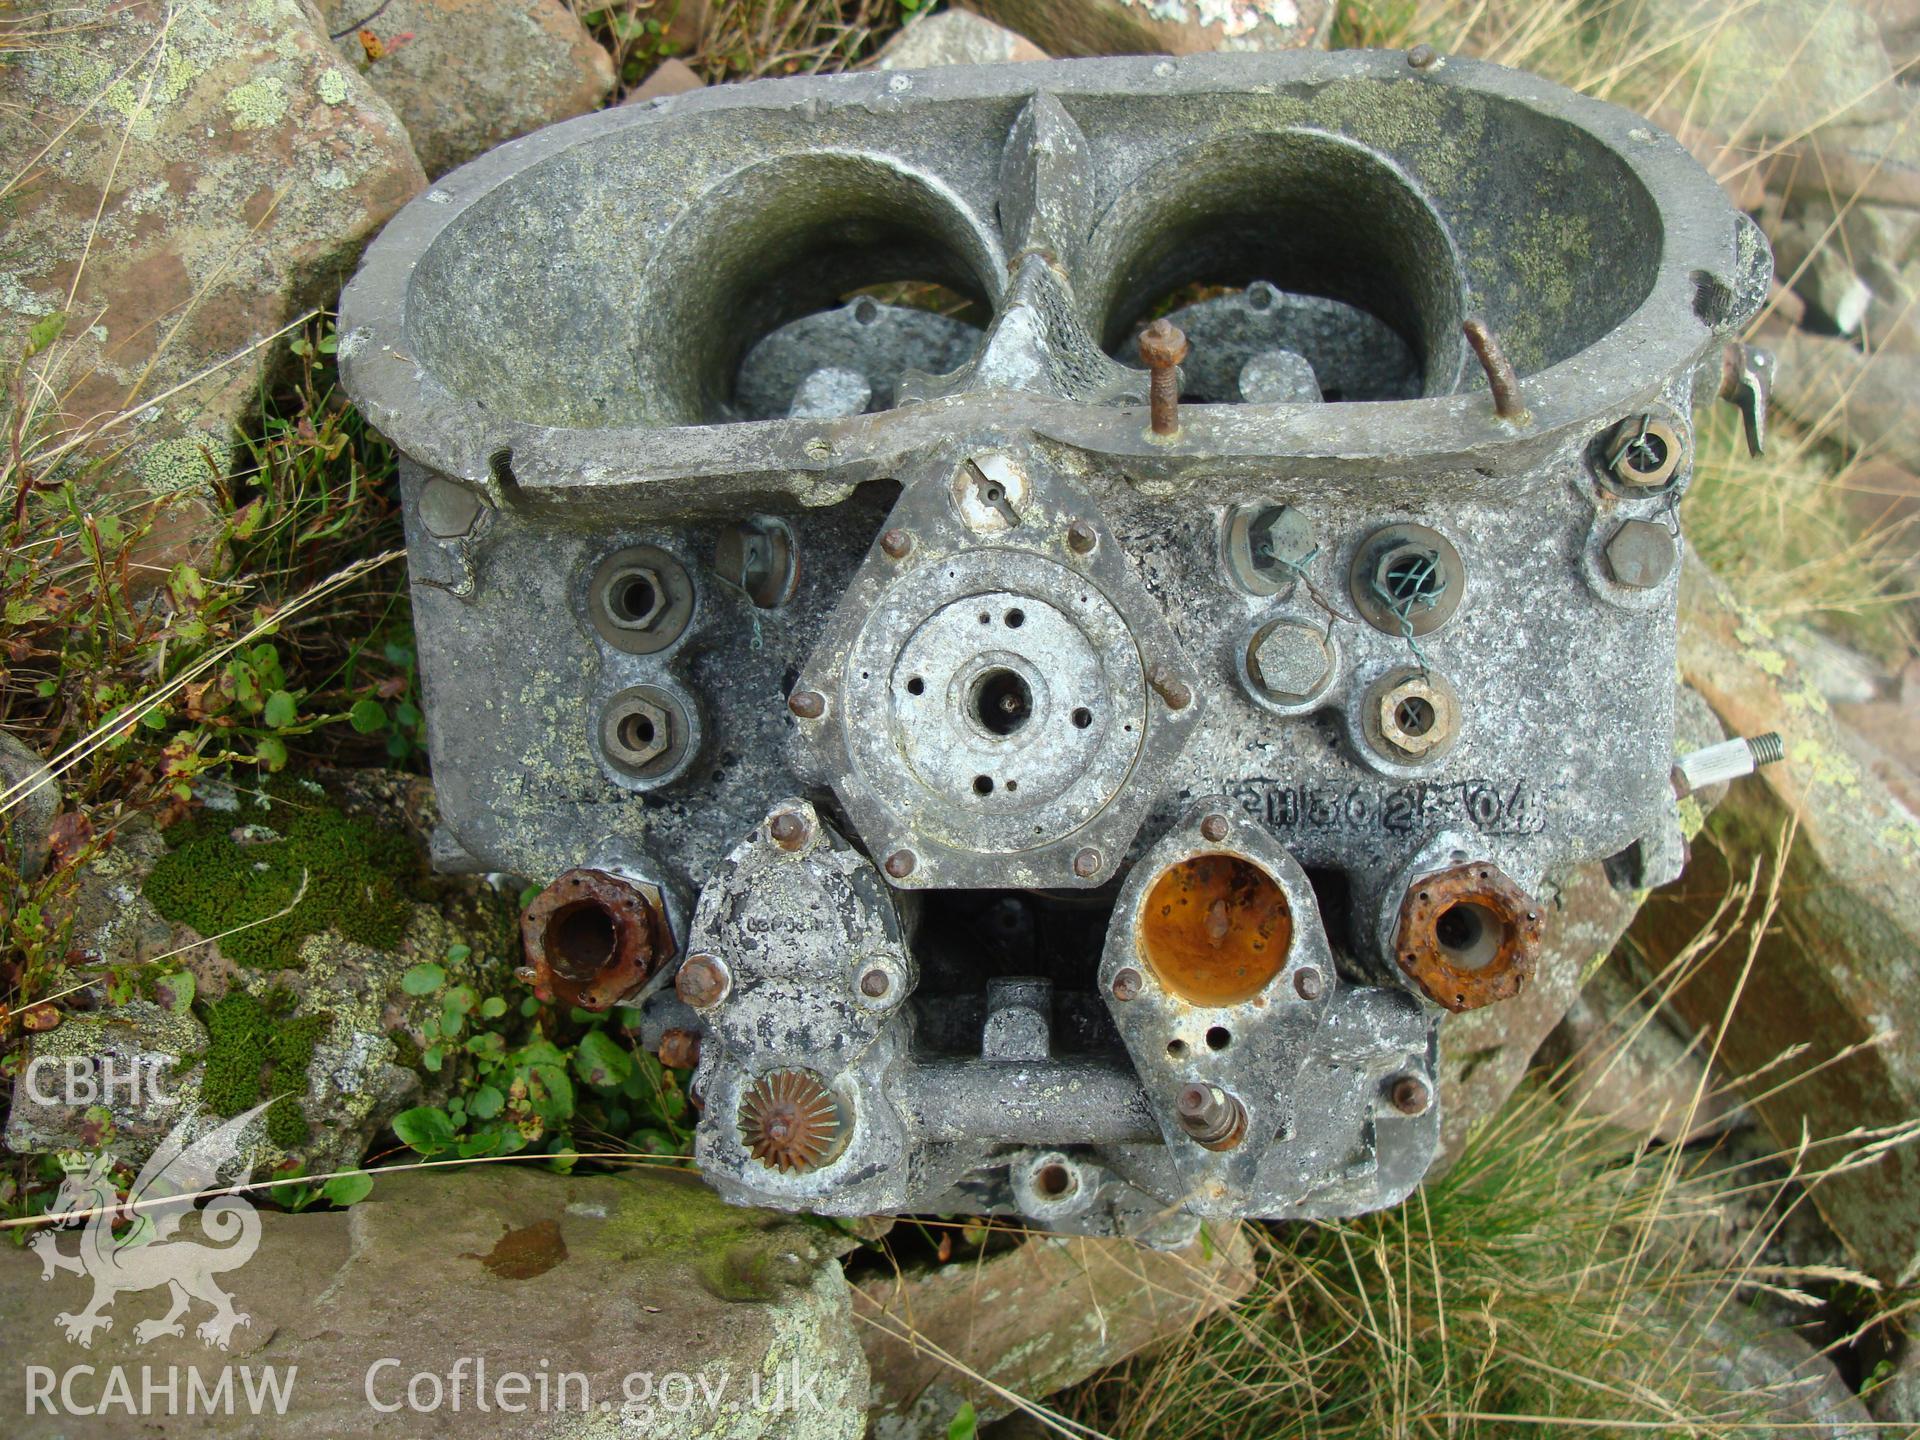 Digital colour photograph of Cerrig Edmwnt engine taken on 24/09/2008 by R.P.Sambrook during the Brecon Beacons (east) Uplands Survey undertaken by Trysor.